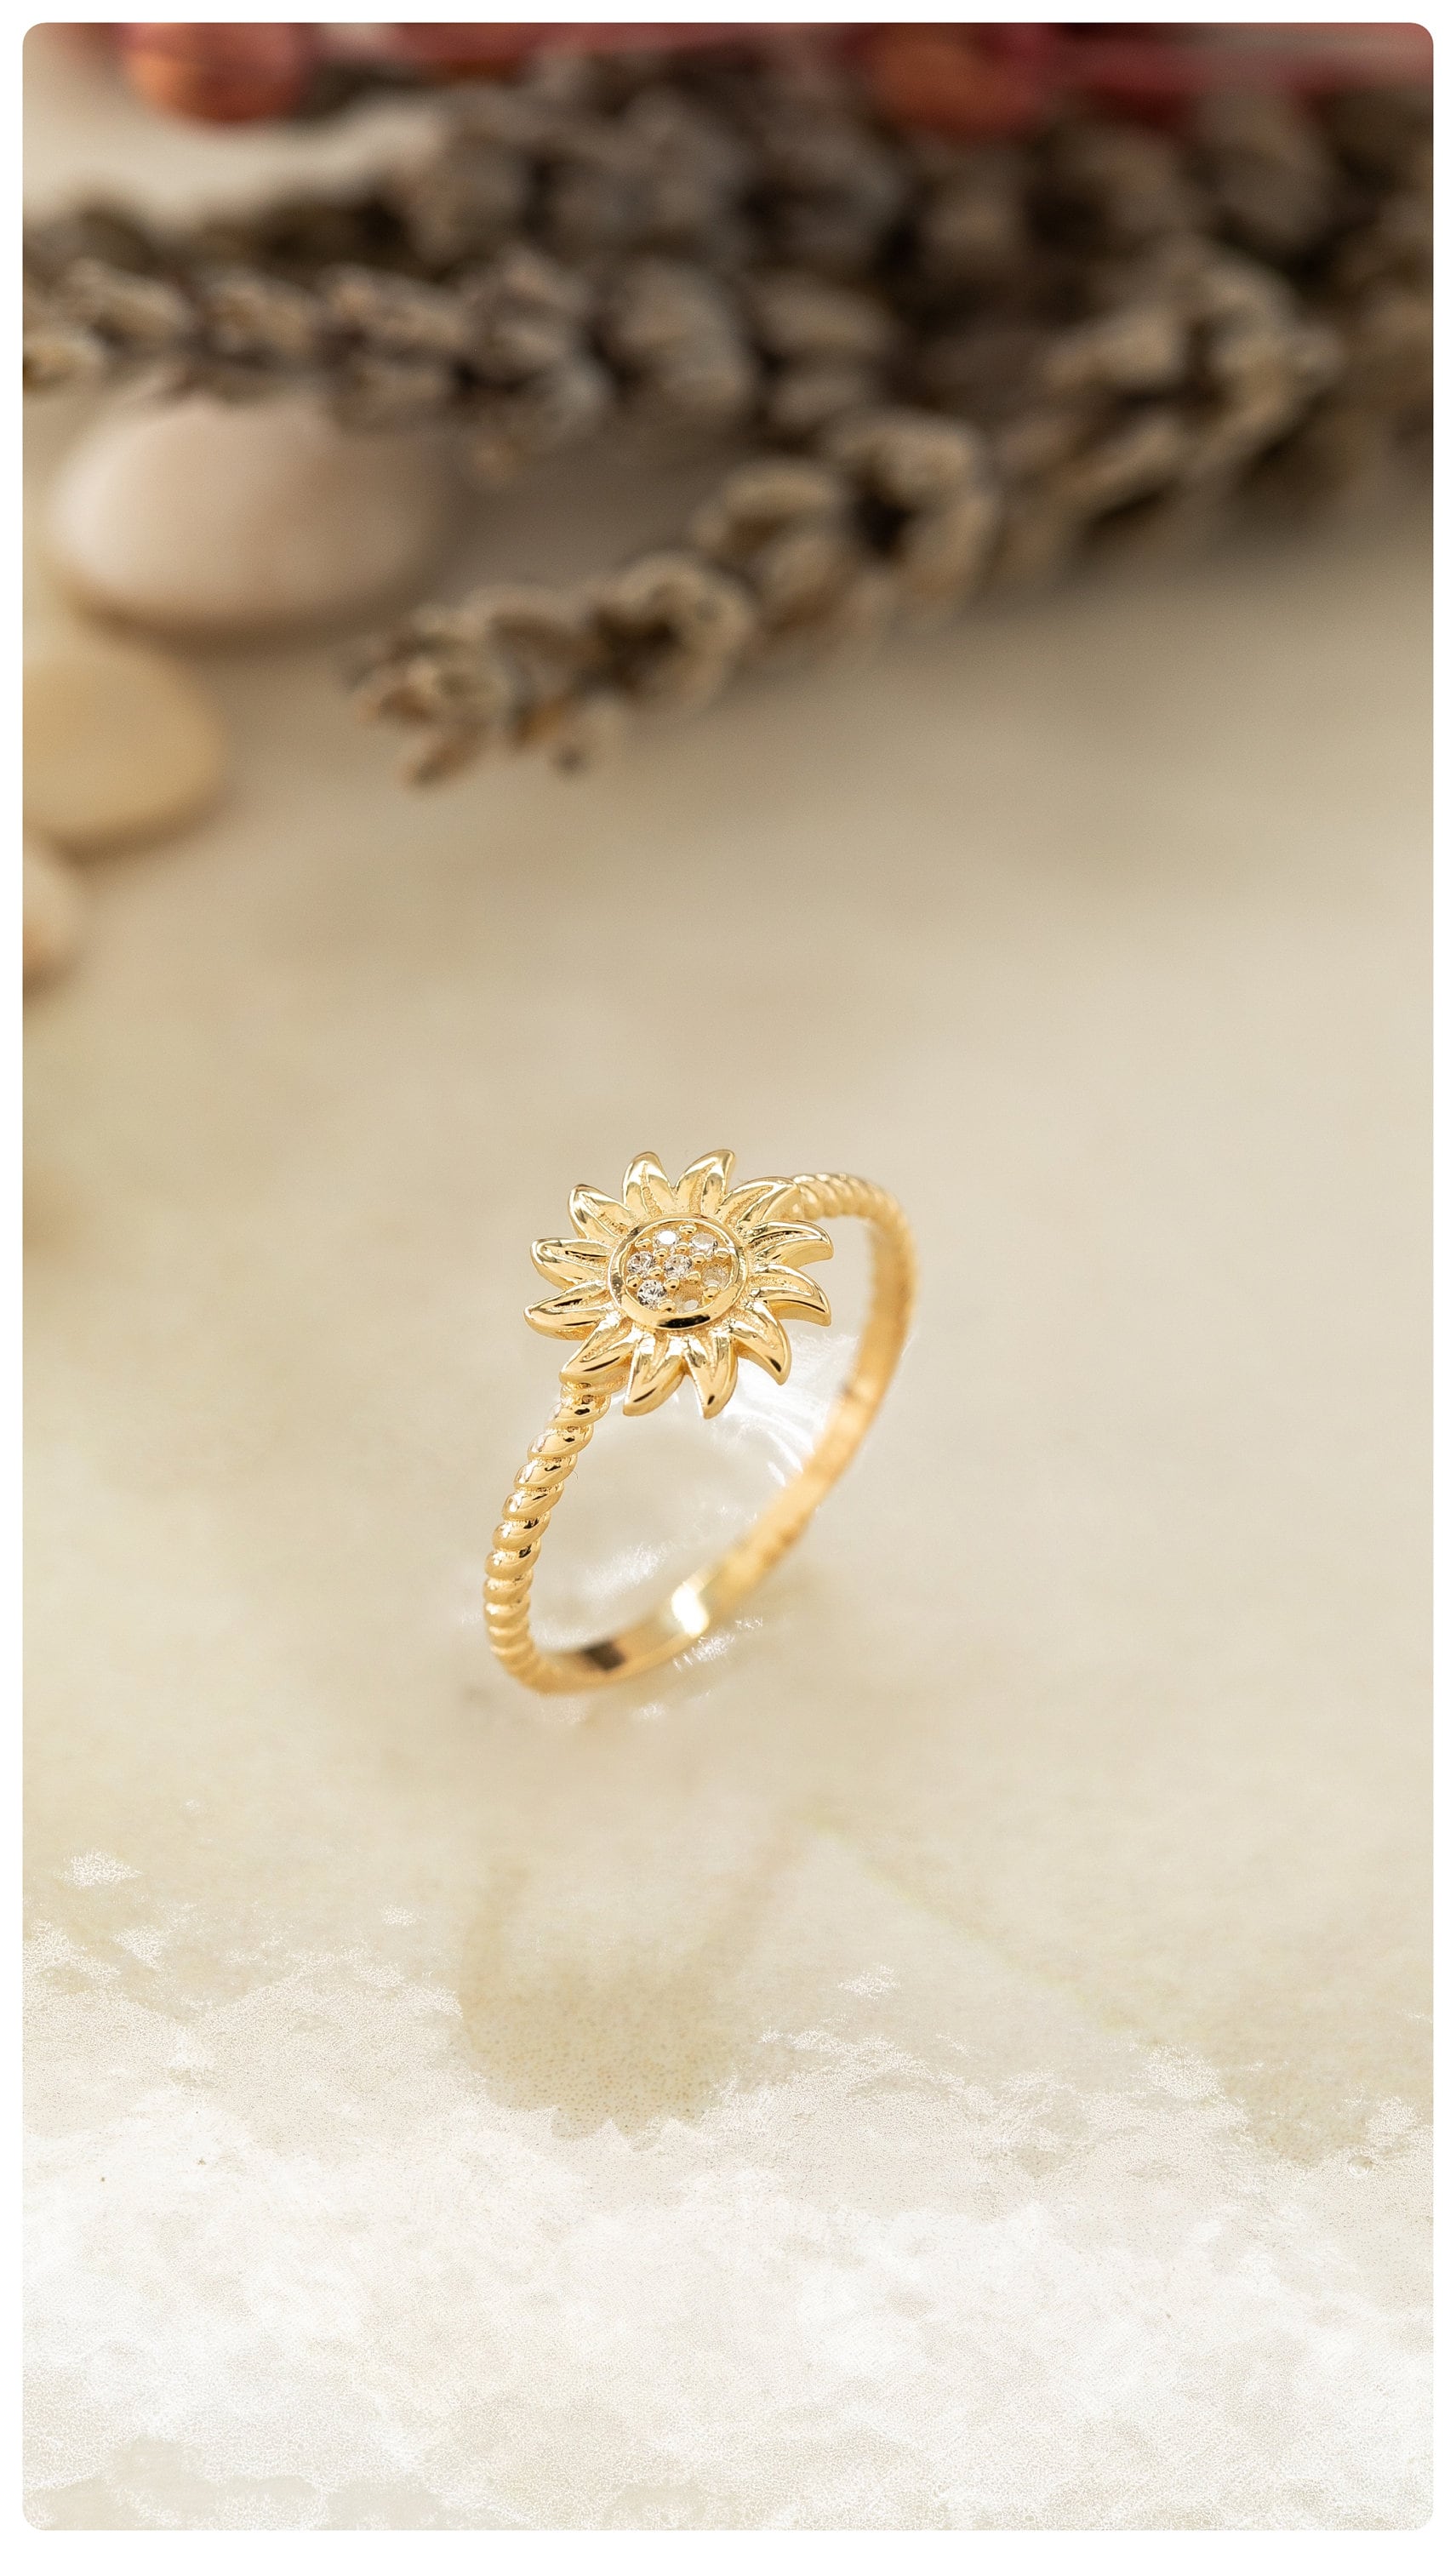 14K Solid Gold Sunflower Ring 925 Sterling Silver Floral Design, Dainty Jewelry for Women - Beautiful Flower Ring - Perfect Gift for Her